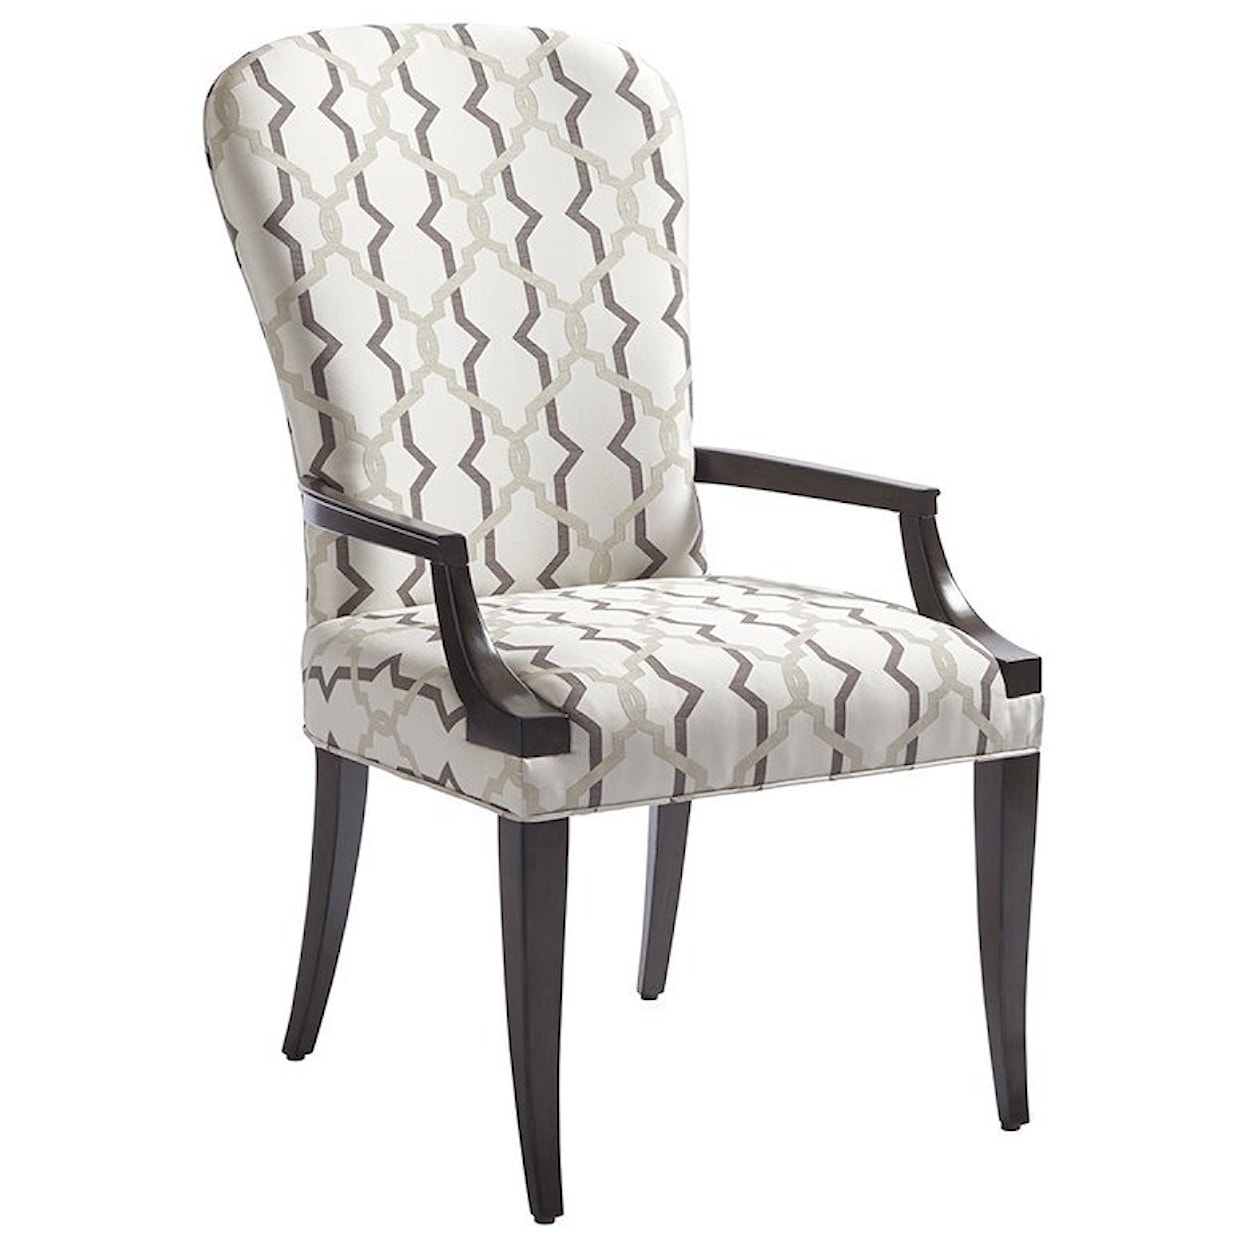 Barclay Butera Brentwood Schuler Upholstered Arm Chair (Custom)